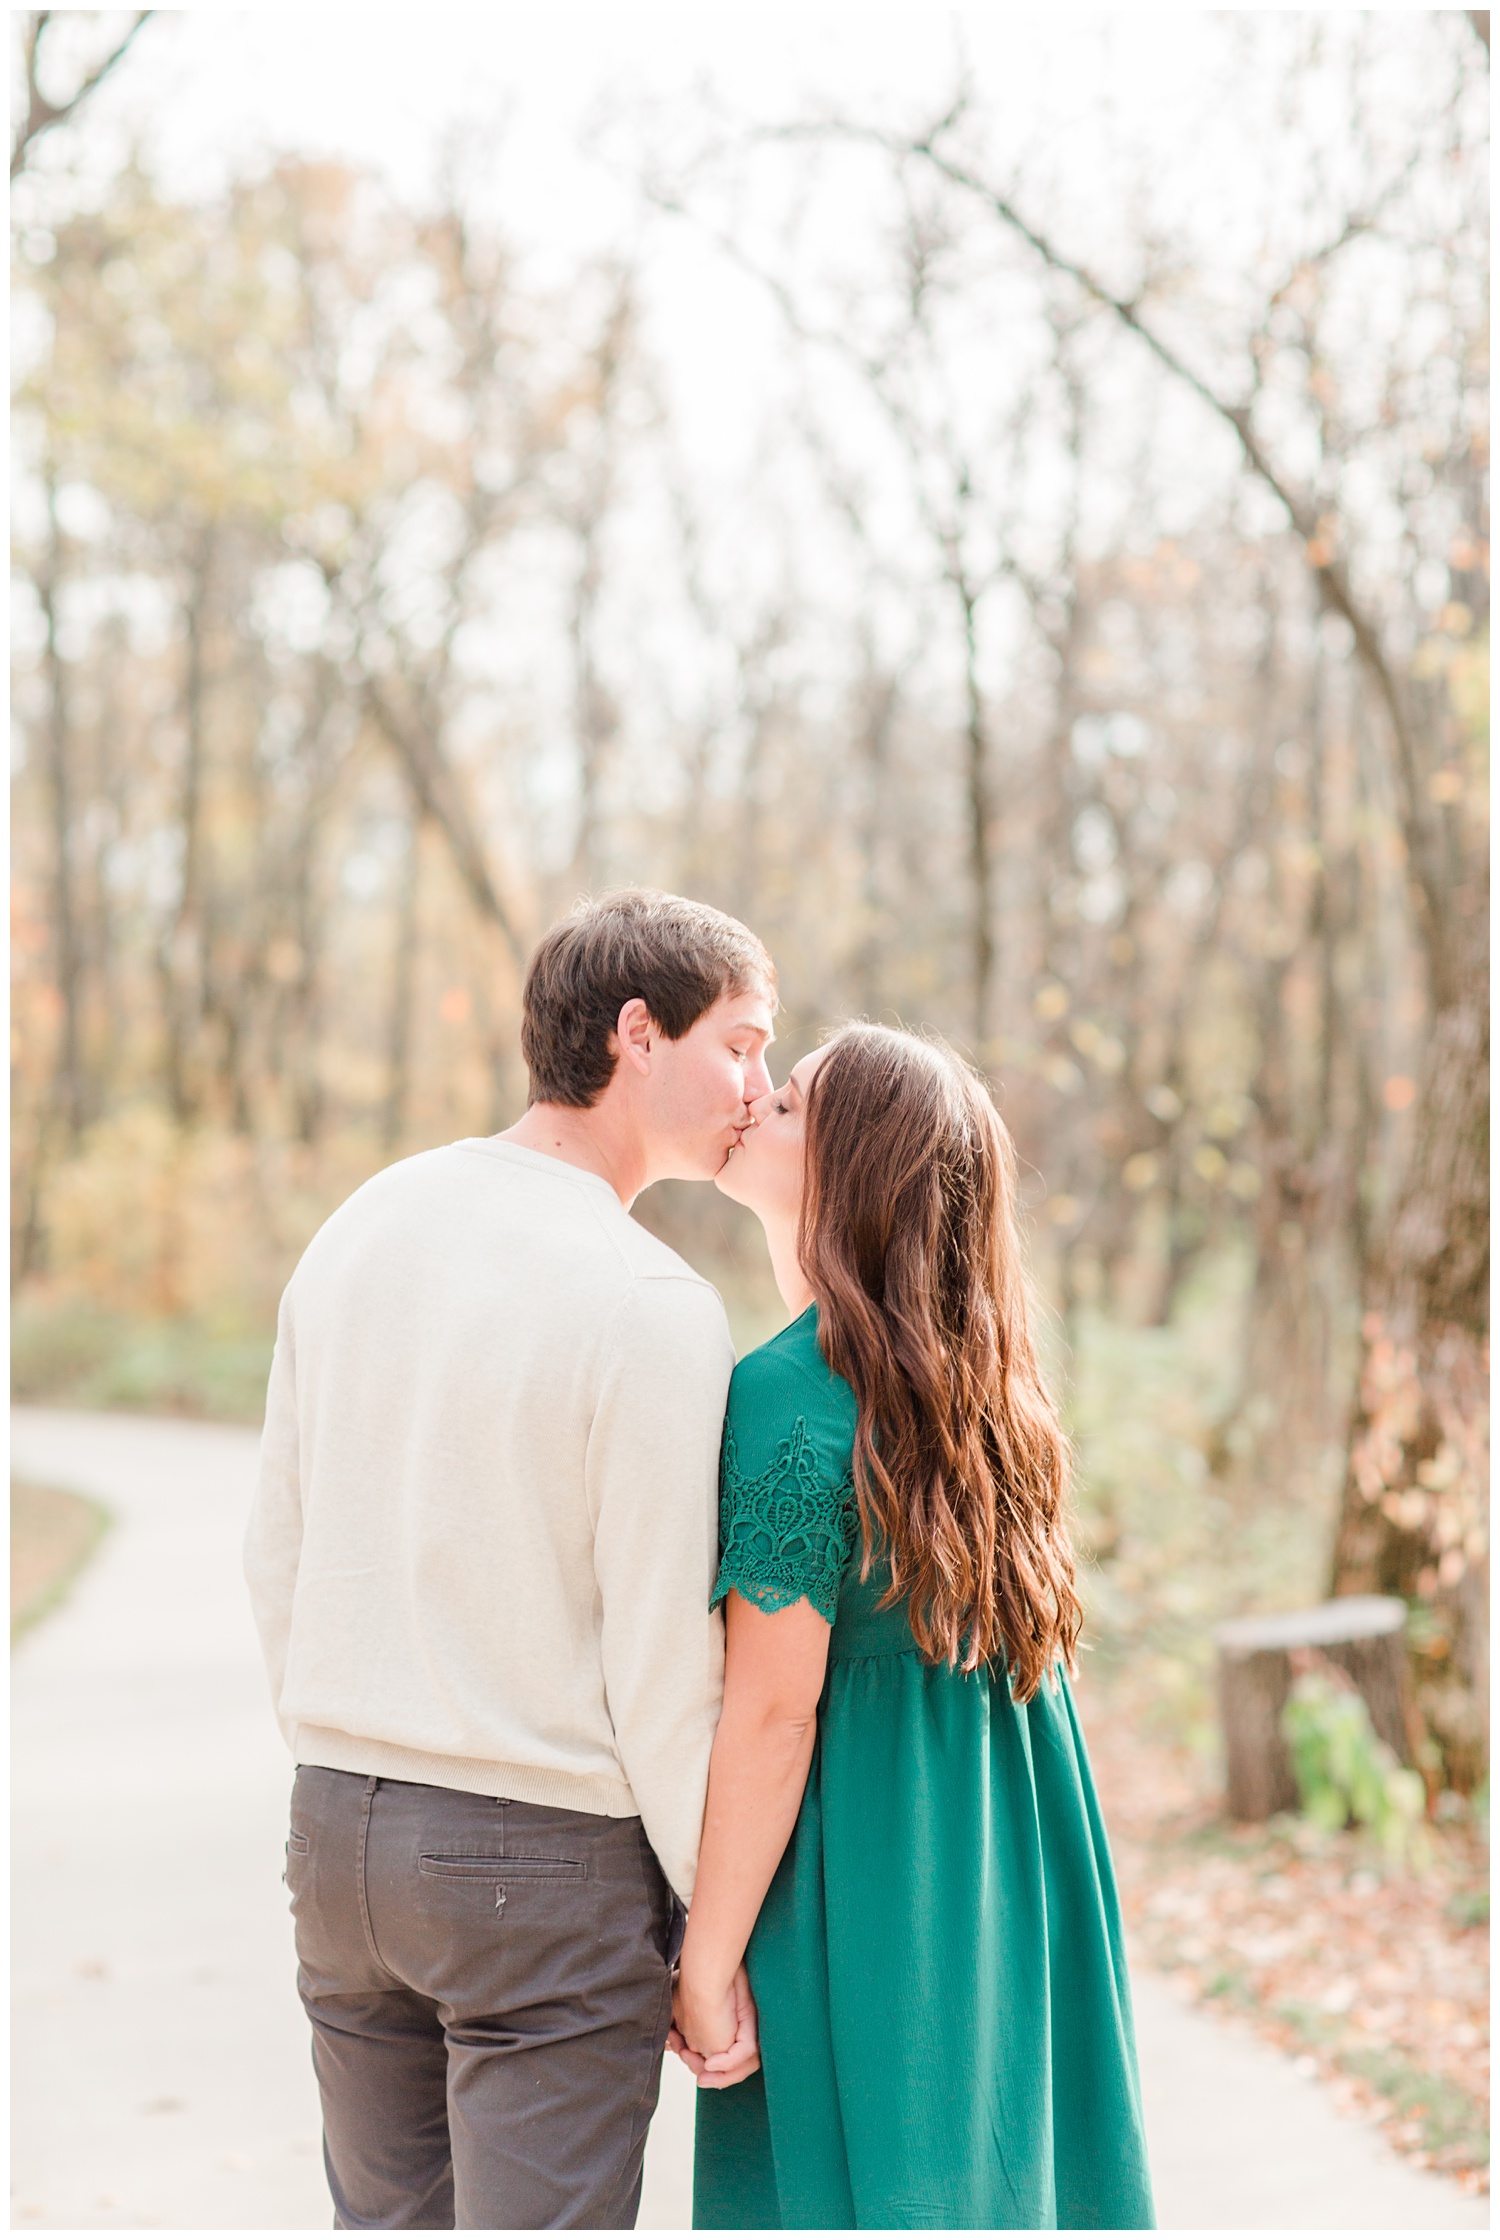 Fall in Iowa, Jenna wearing an emerald green dress kisses Brady in the middle of an autumn path at Lost Island Nature Center | CB Studio